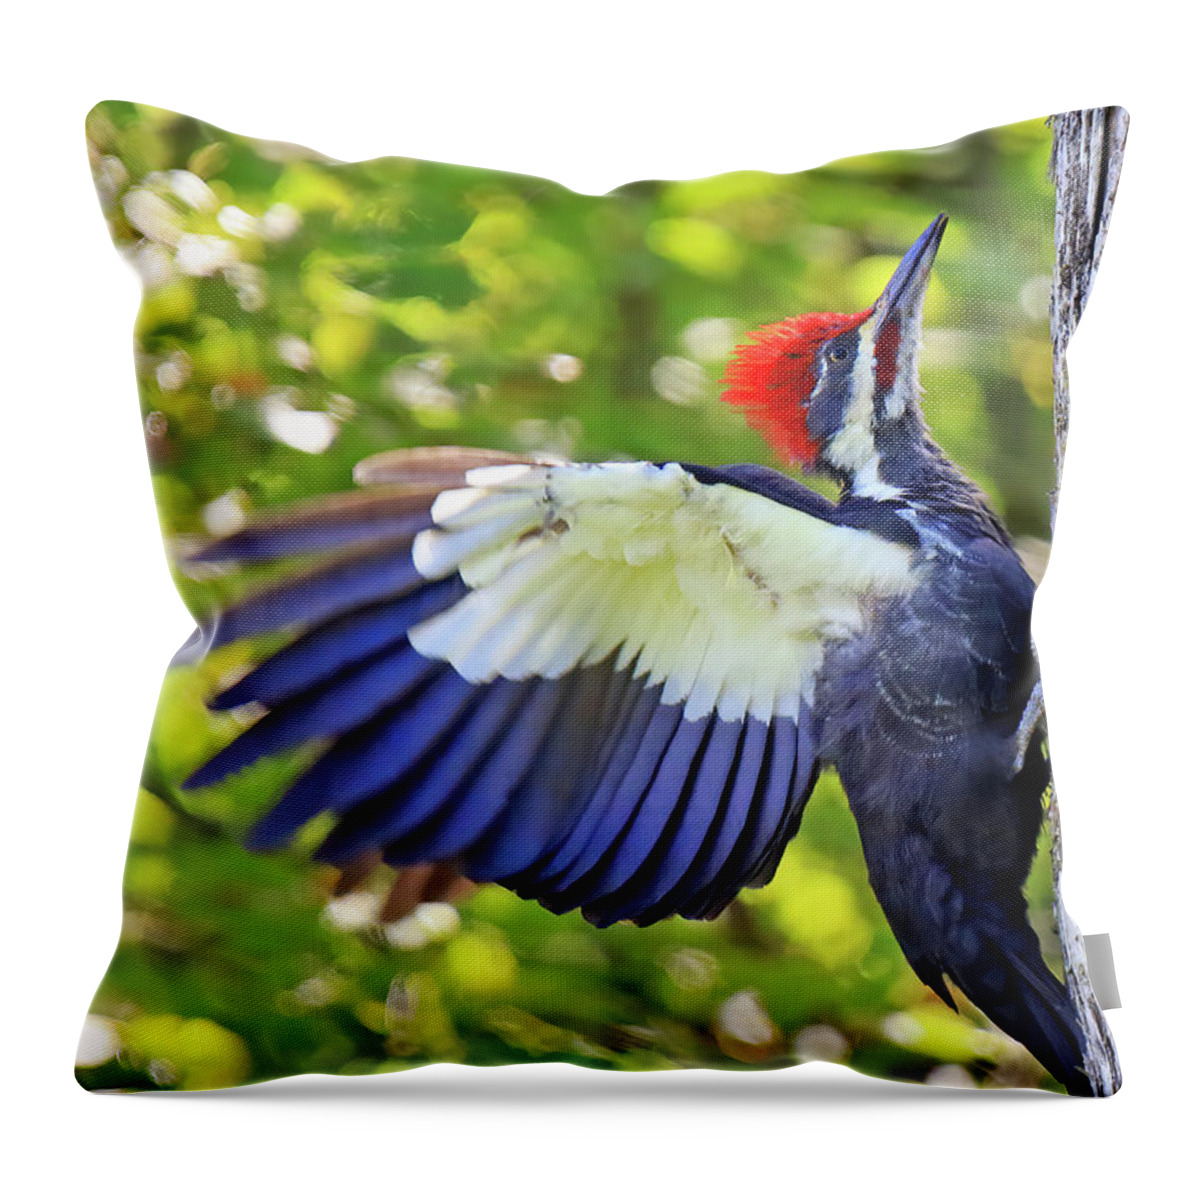 Pileated Woodpecker Throw Pillow featuring the photograph Pileated Woodpecker by Shixing Wen